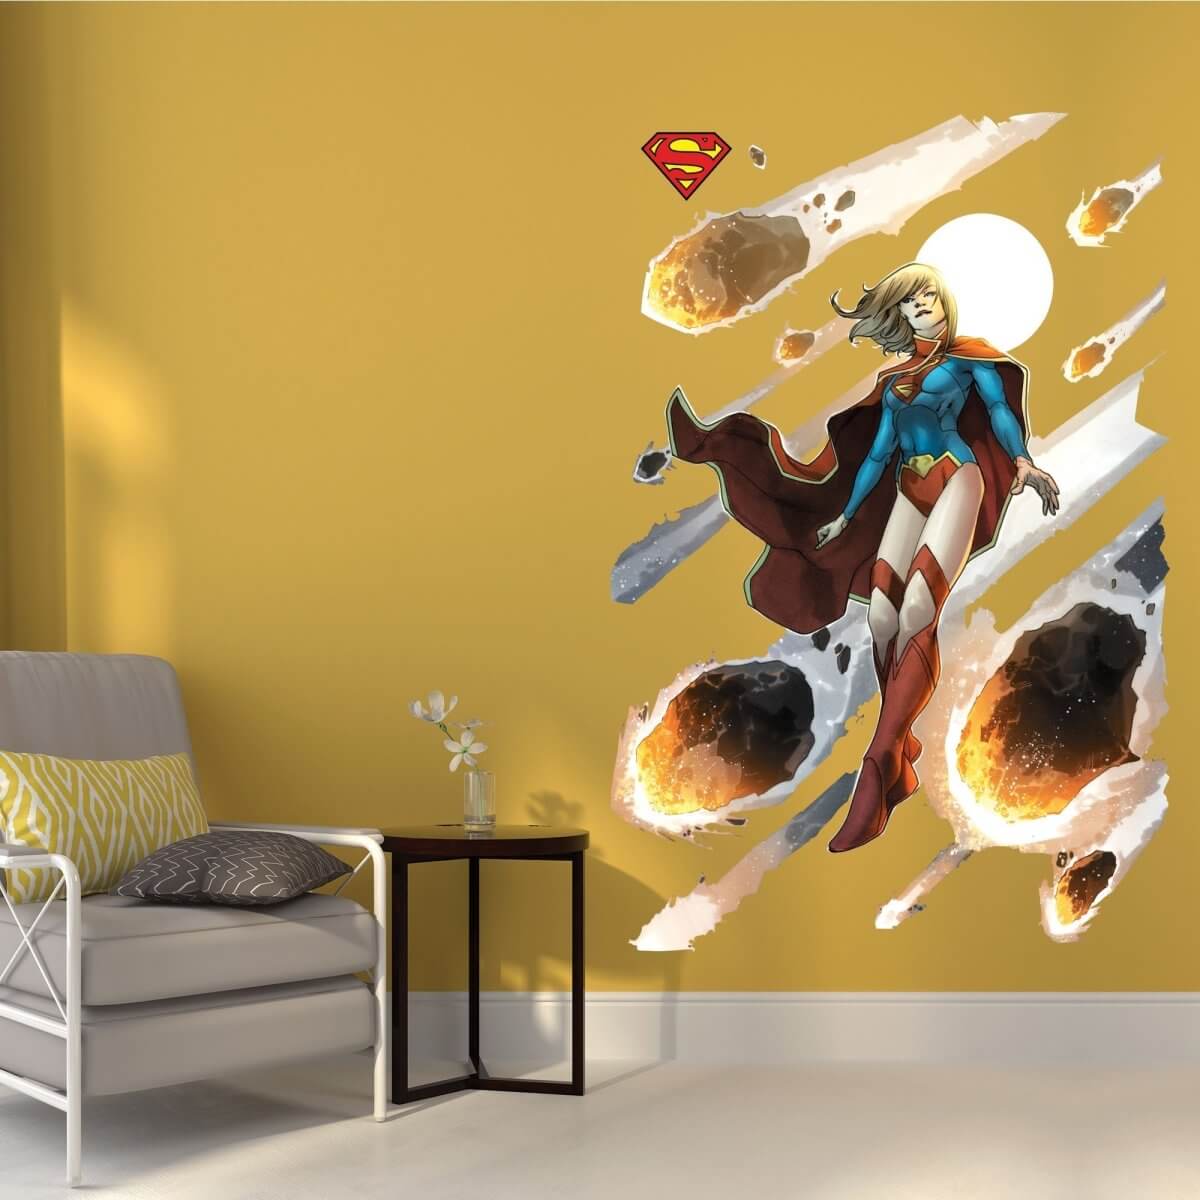 Kismet Decals New 52 Supergirl #1 Comic Cover Series Licensed Wall Sticker - Easy DIY Home & Room Decor Wall Art - Kismet Decals